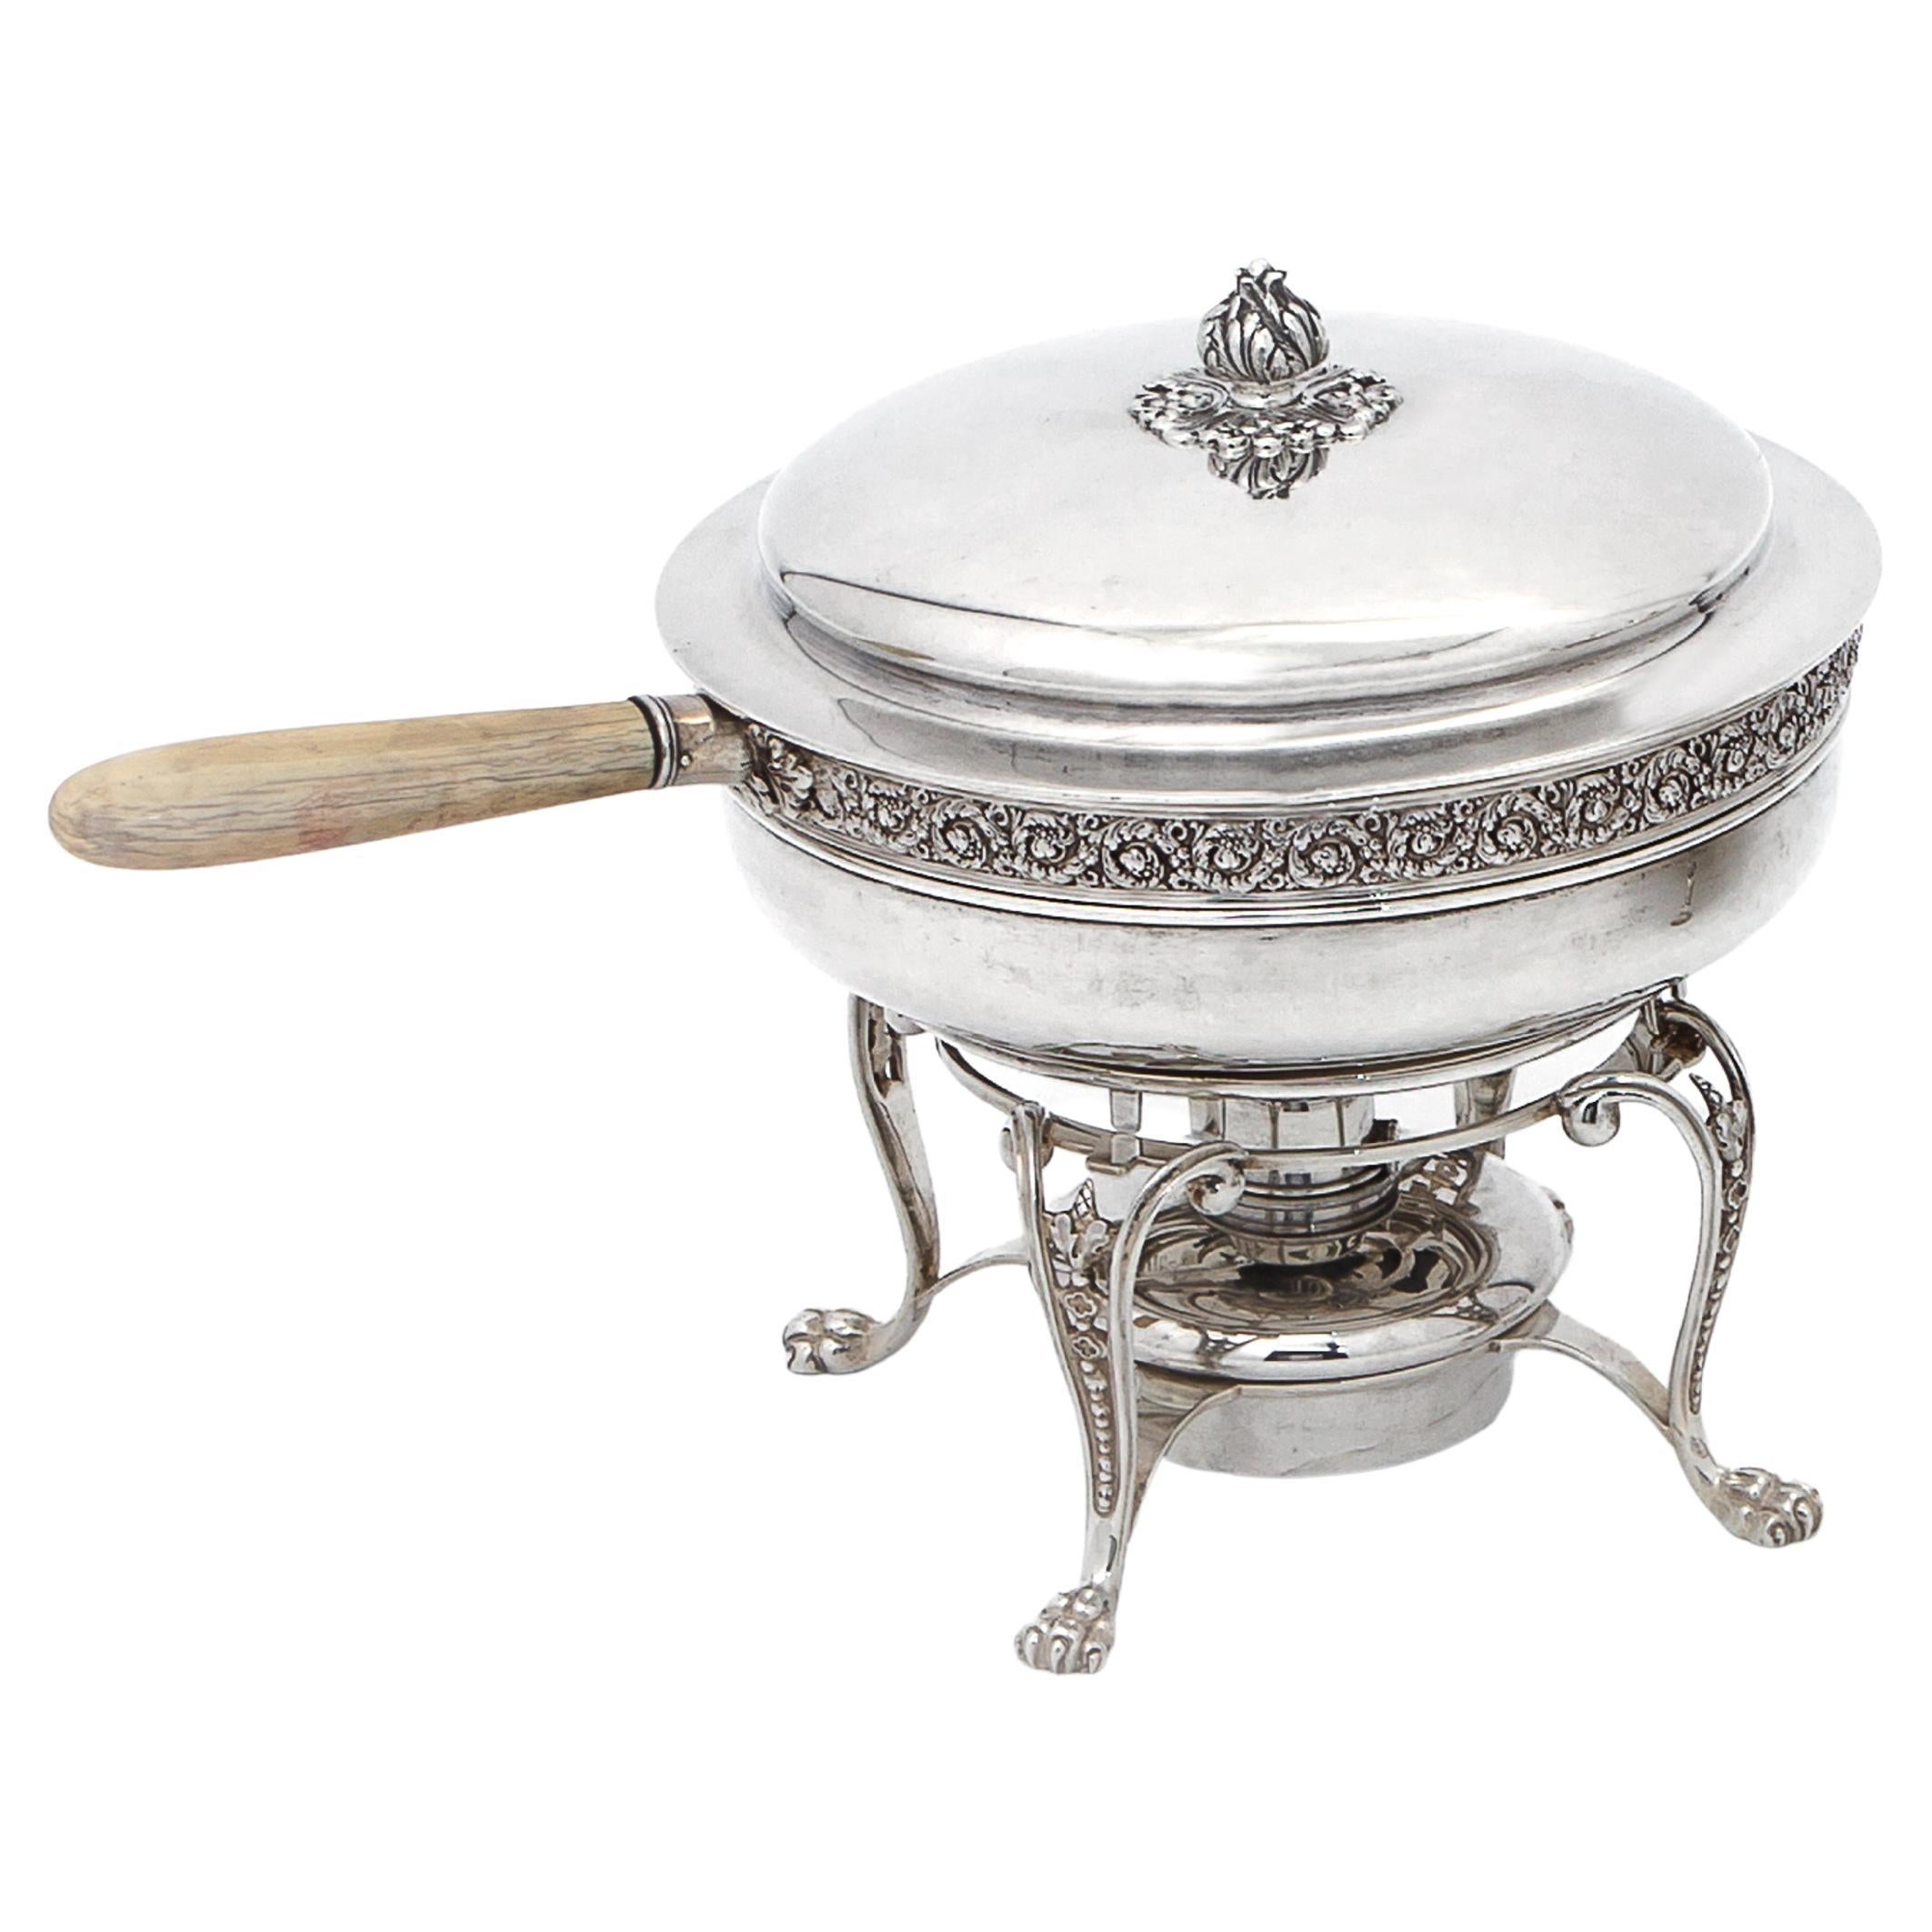 What is another name for a chafing dish?